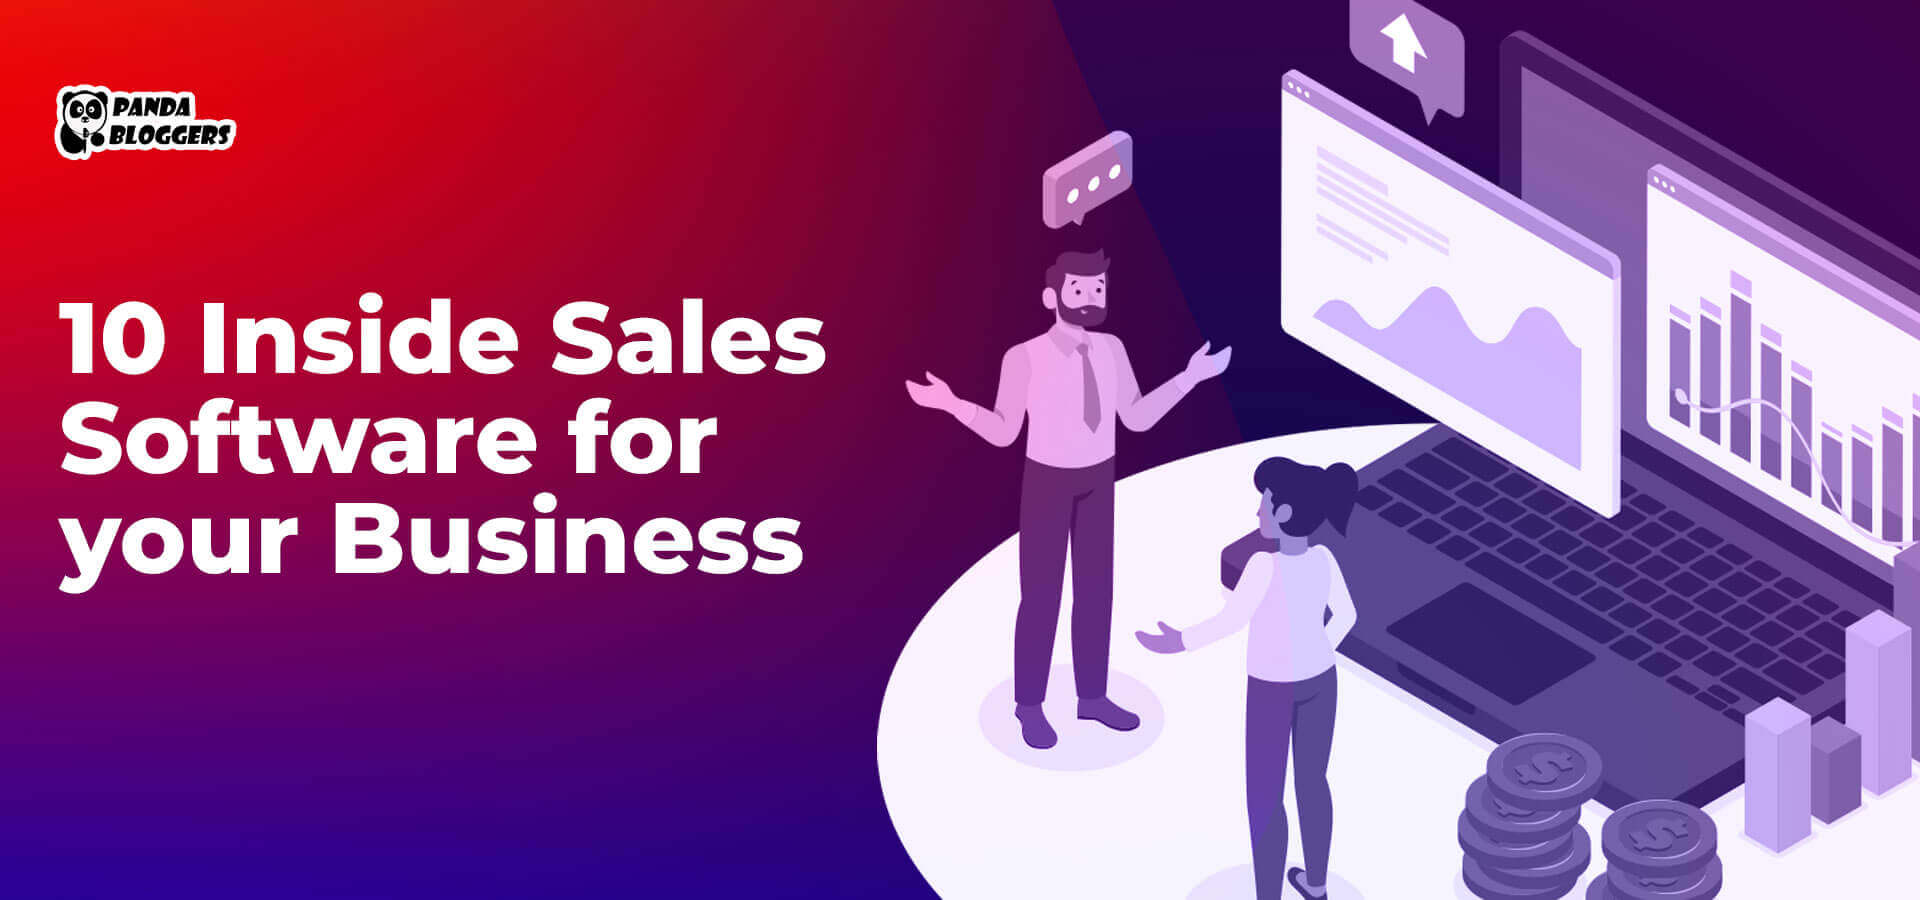 Inside Sales Software for Your Business